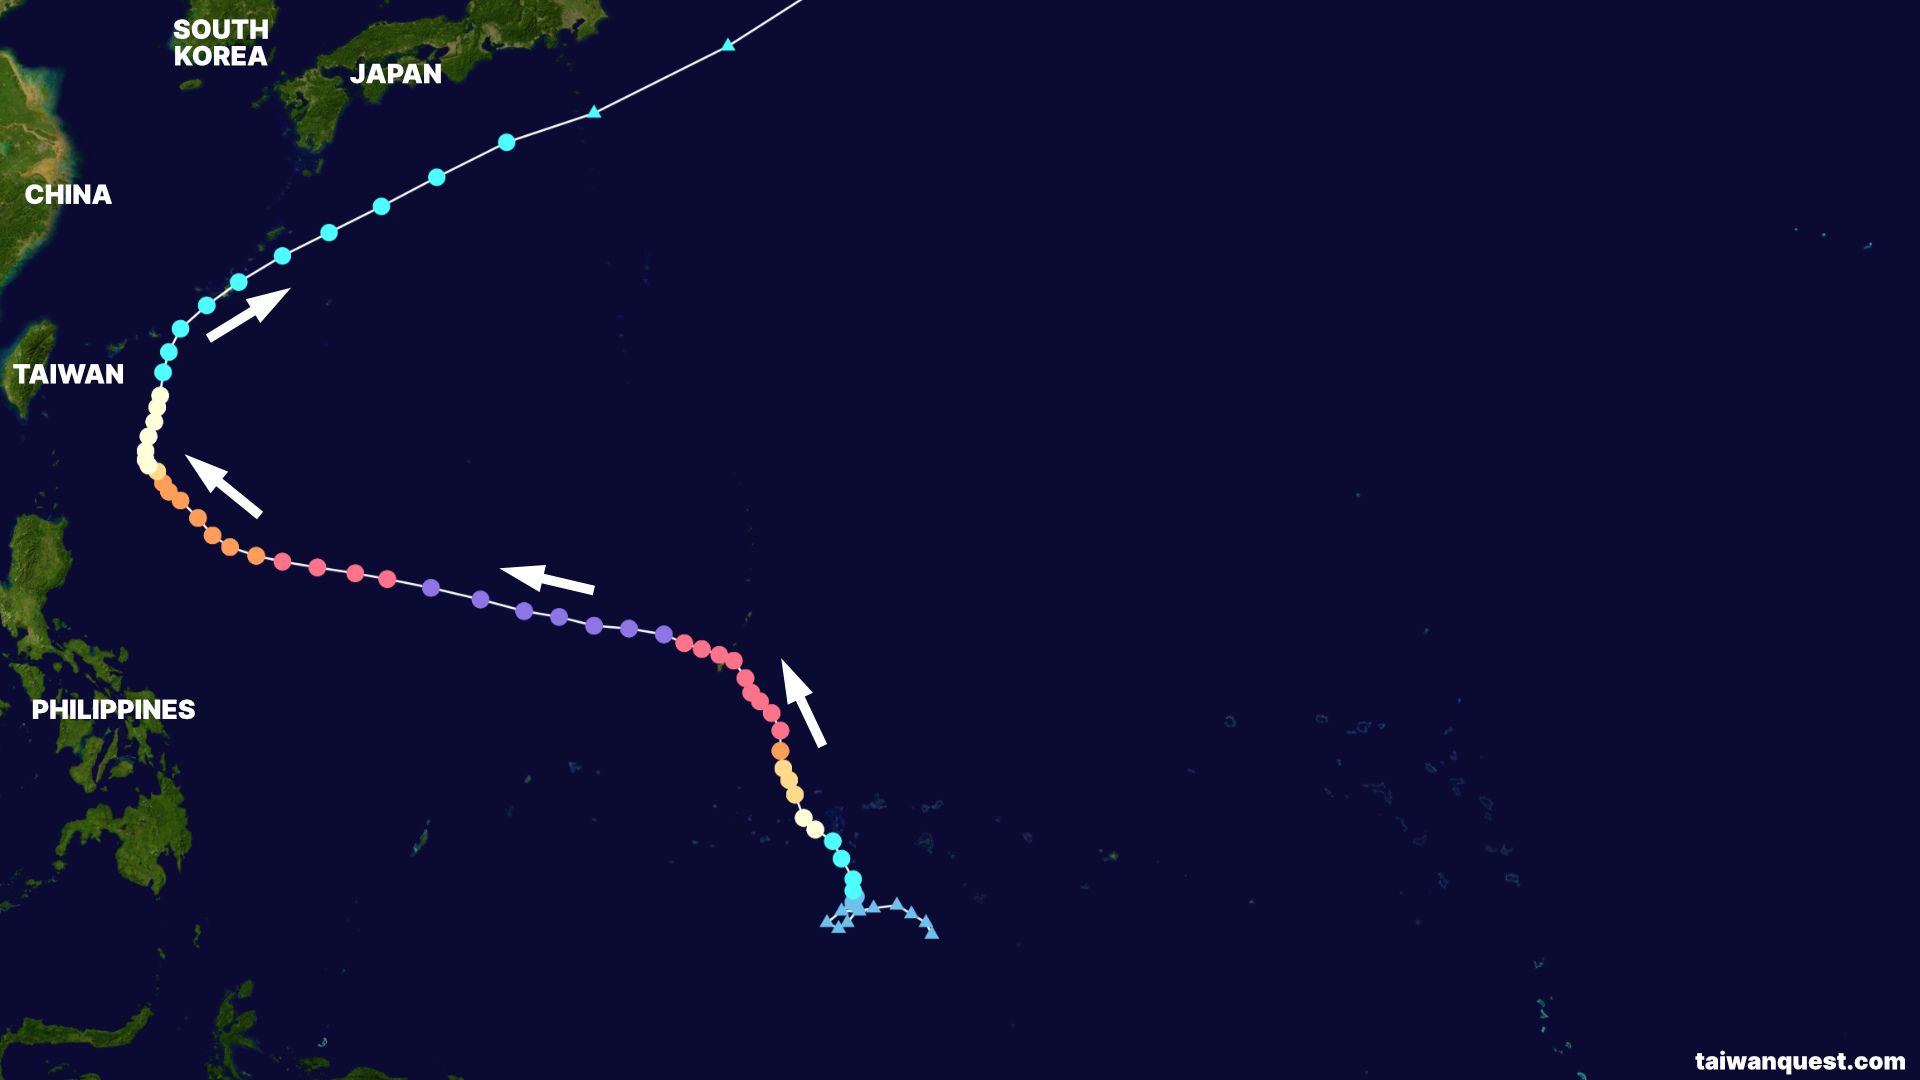 Image of the Pacific Ocean and surrounding countries, overlaid with the path of Typhoon Mawar.